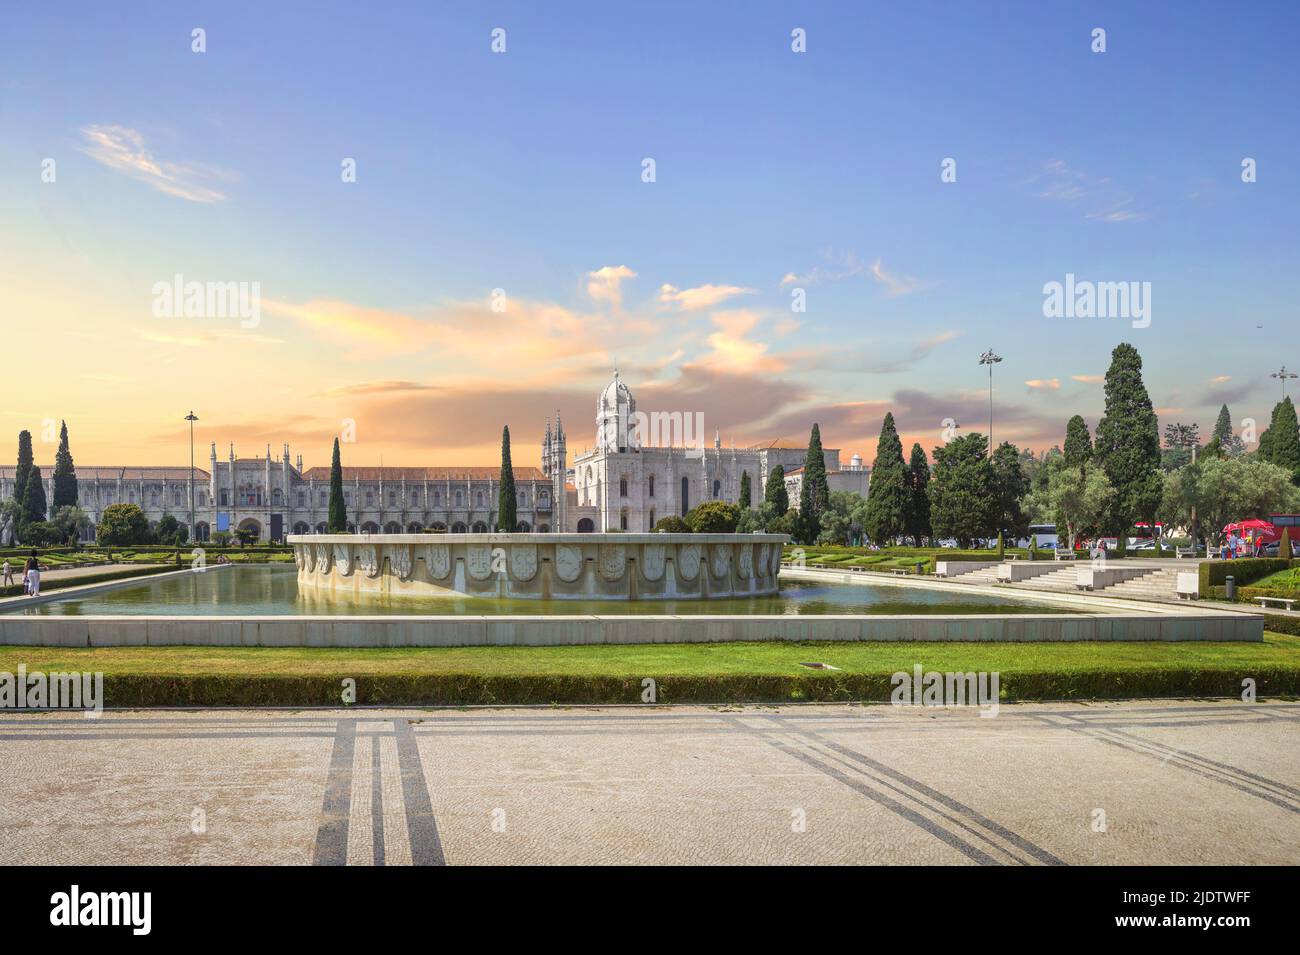 Empire Square with the fountain in the center and Jeronimos Monastery on the background. Belem, Lisbon, Portugal Stock Photo